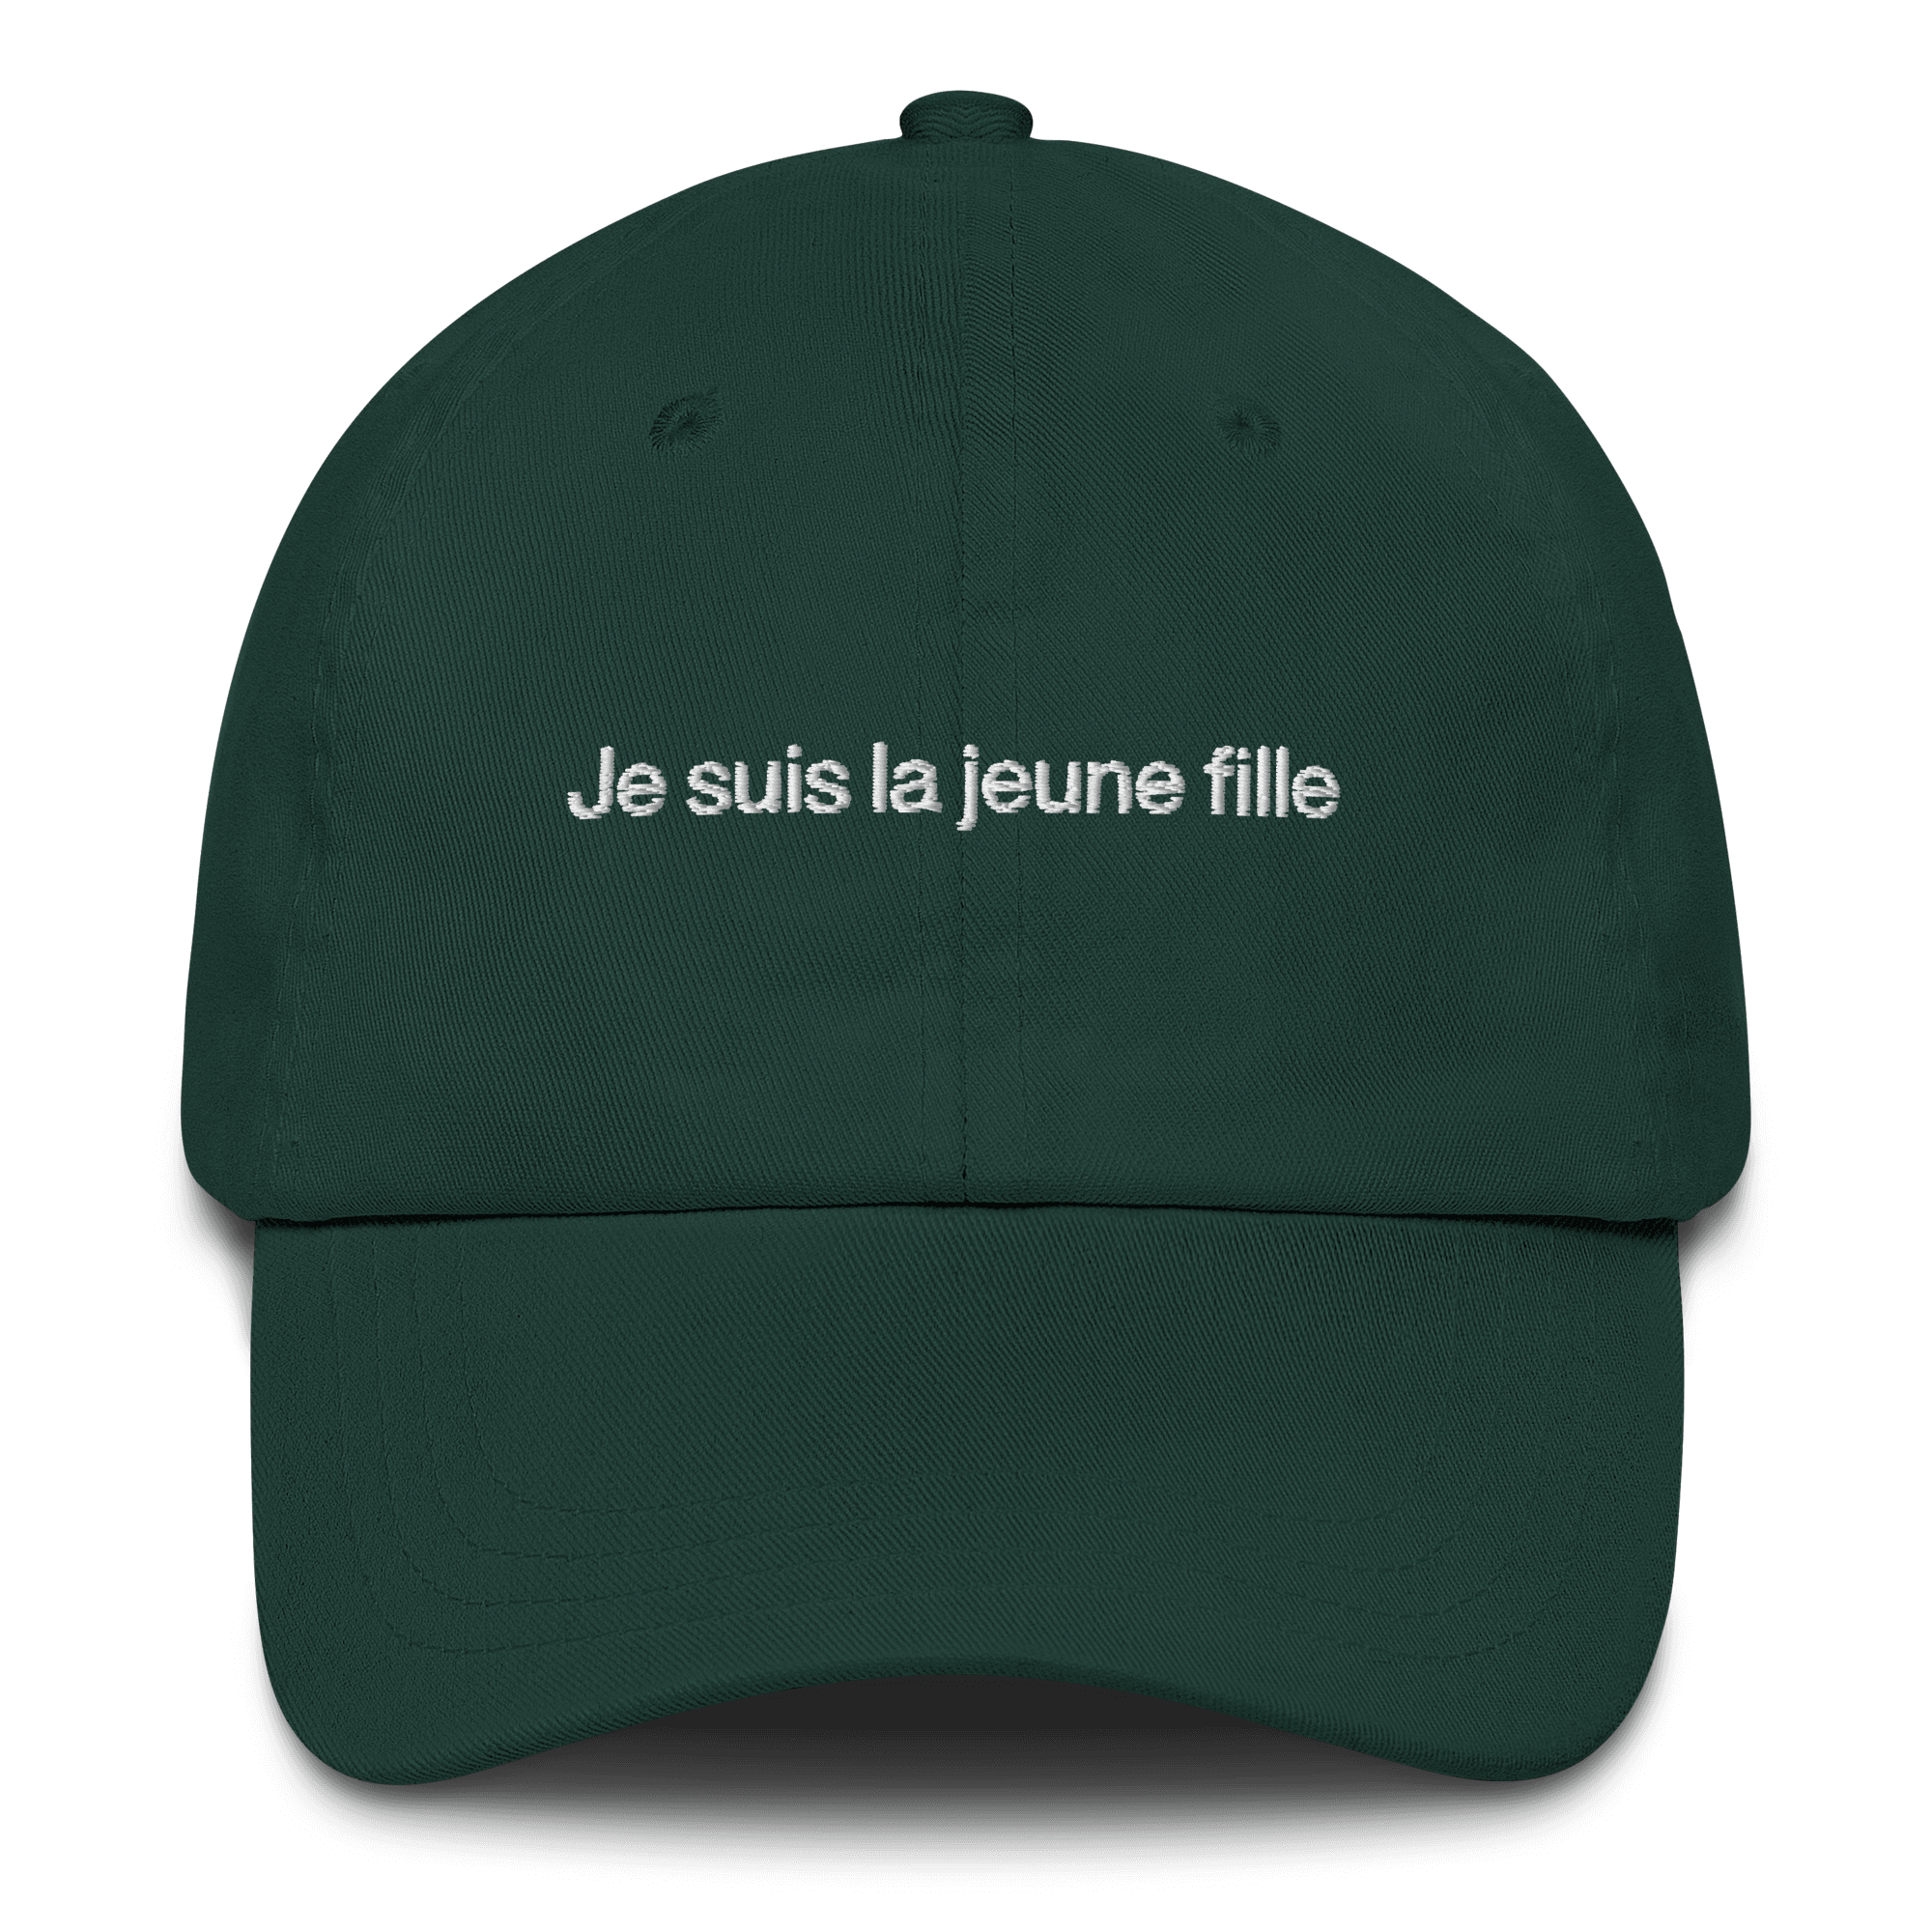 "Je suis la jeune fille" Embroidered Hat (from the Muzzy commercial) - Polychrome Goods 🍊